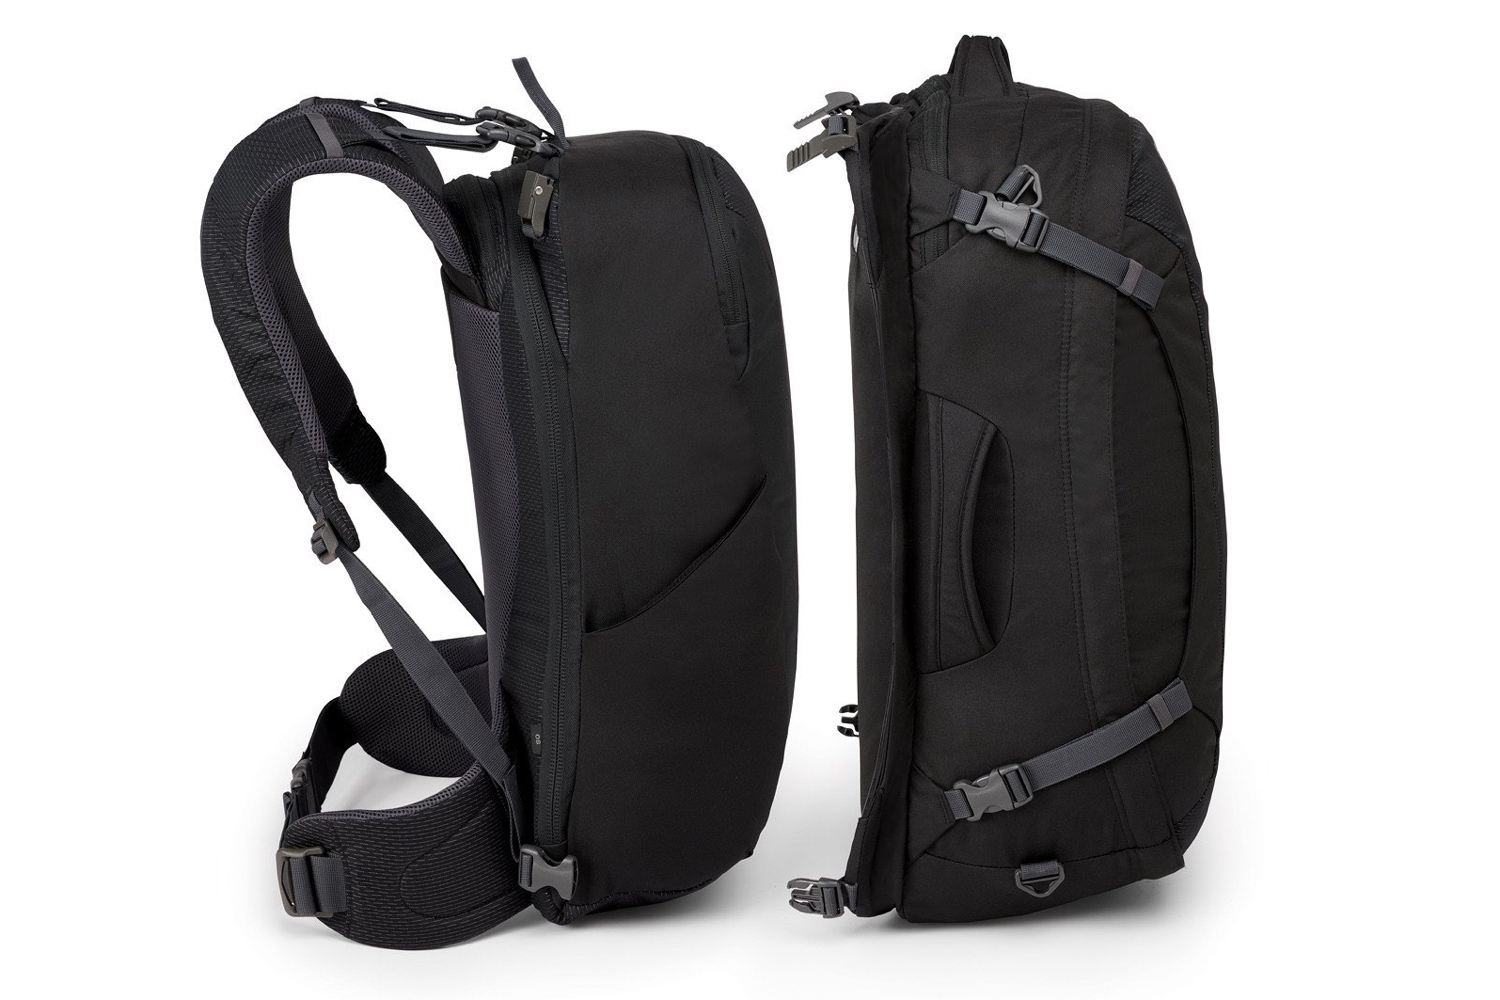 The Best Laptop Backpacks and Bags for Traveling | Digital Trends